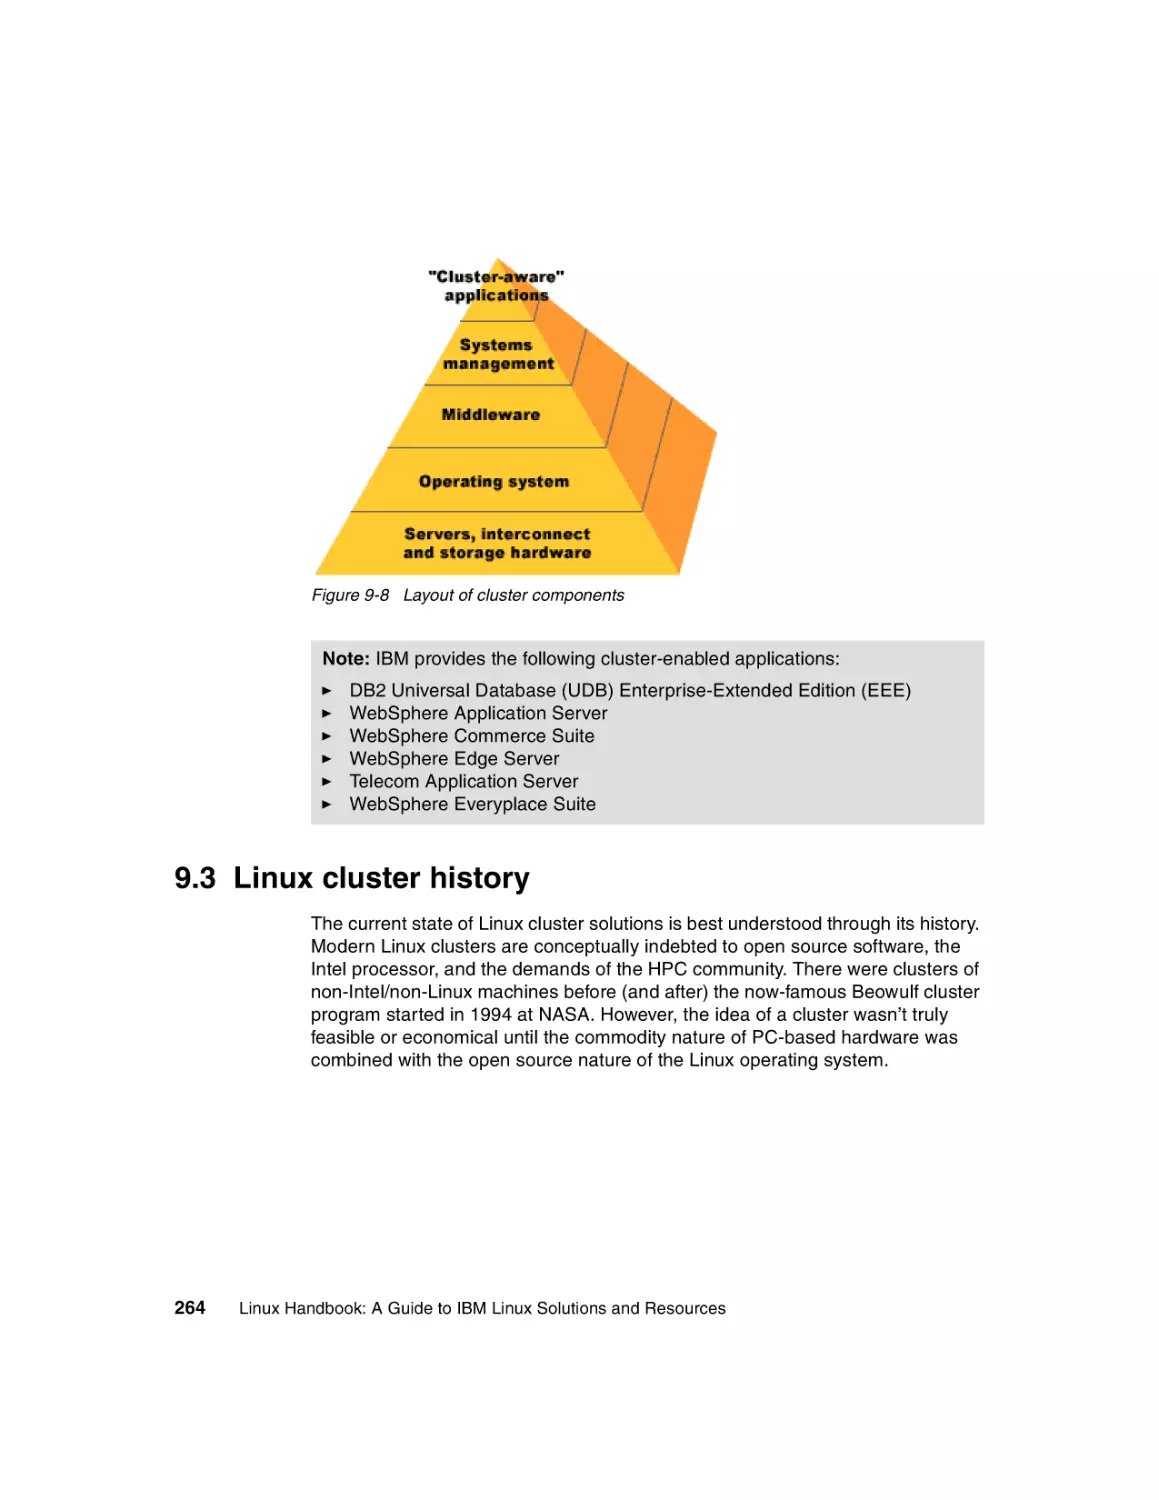 9.3 Linux cluster history